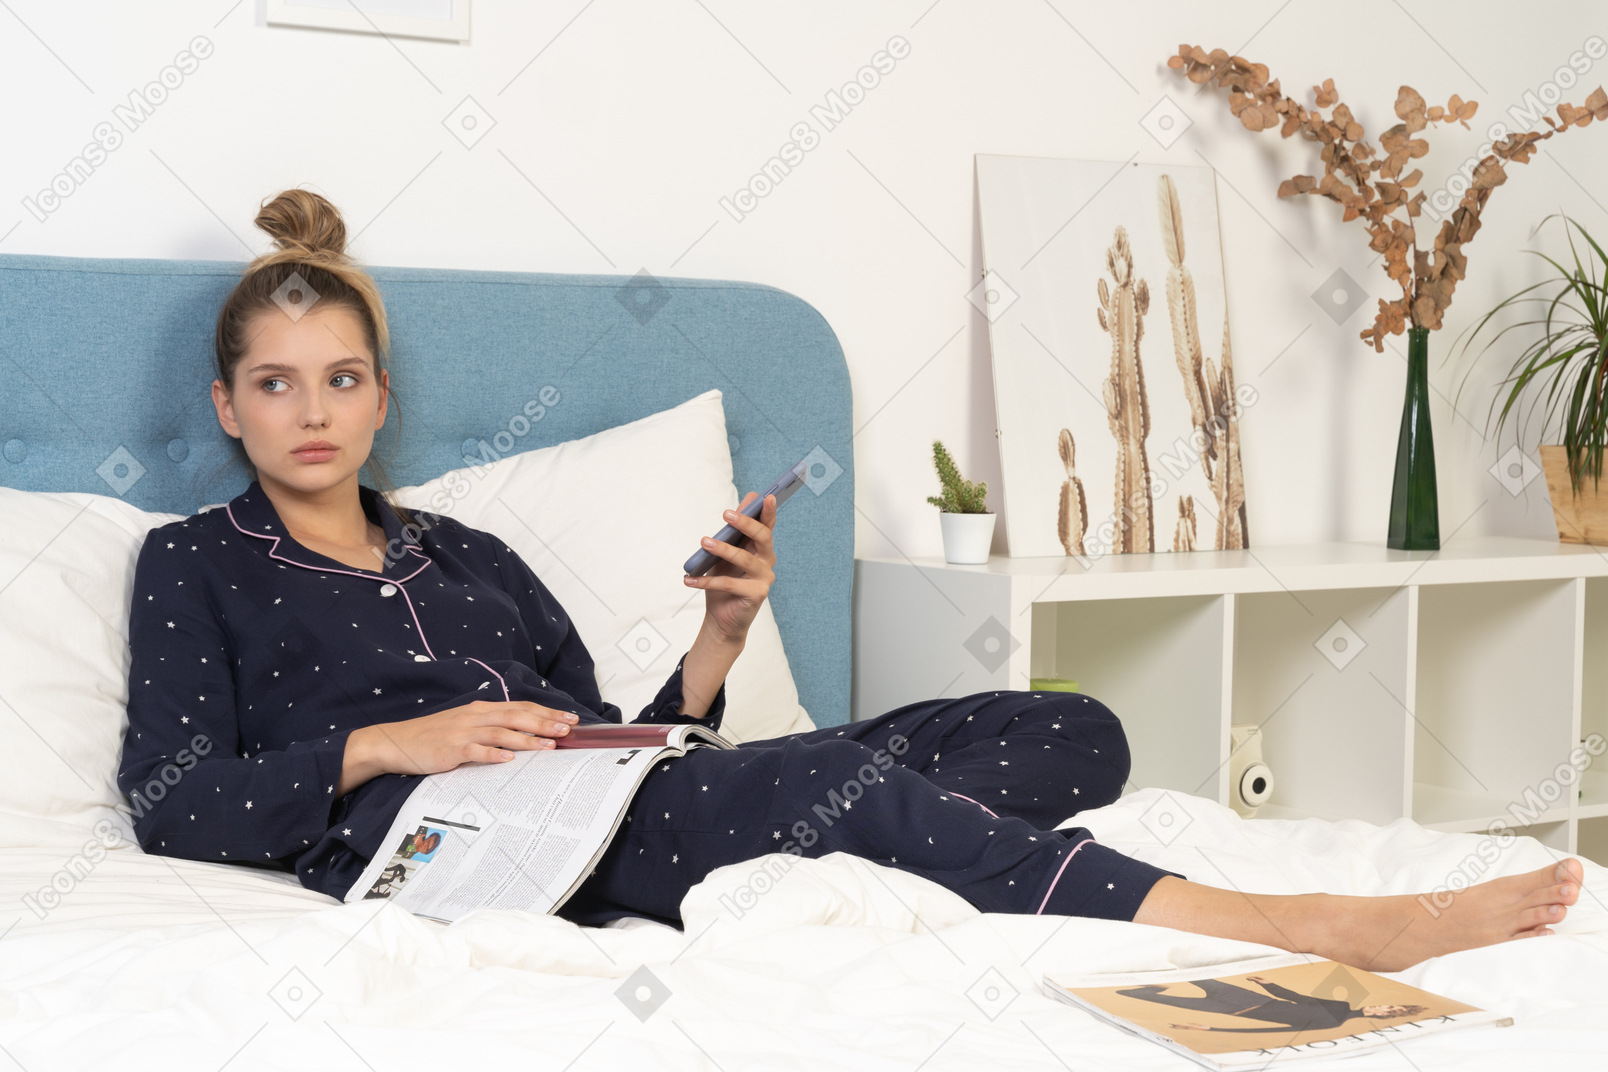 Full-length of a young female in pajama laying in bed while surfing the net